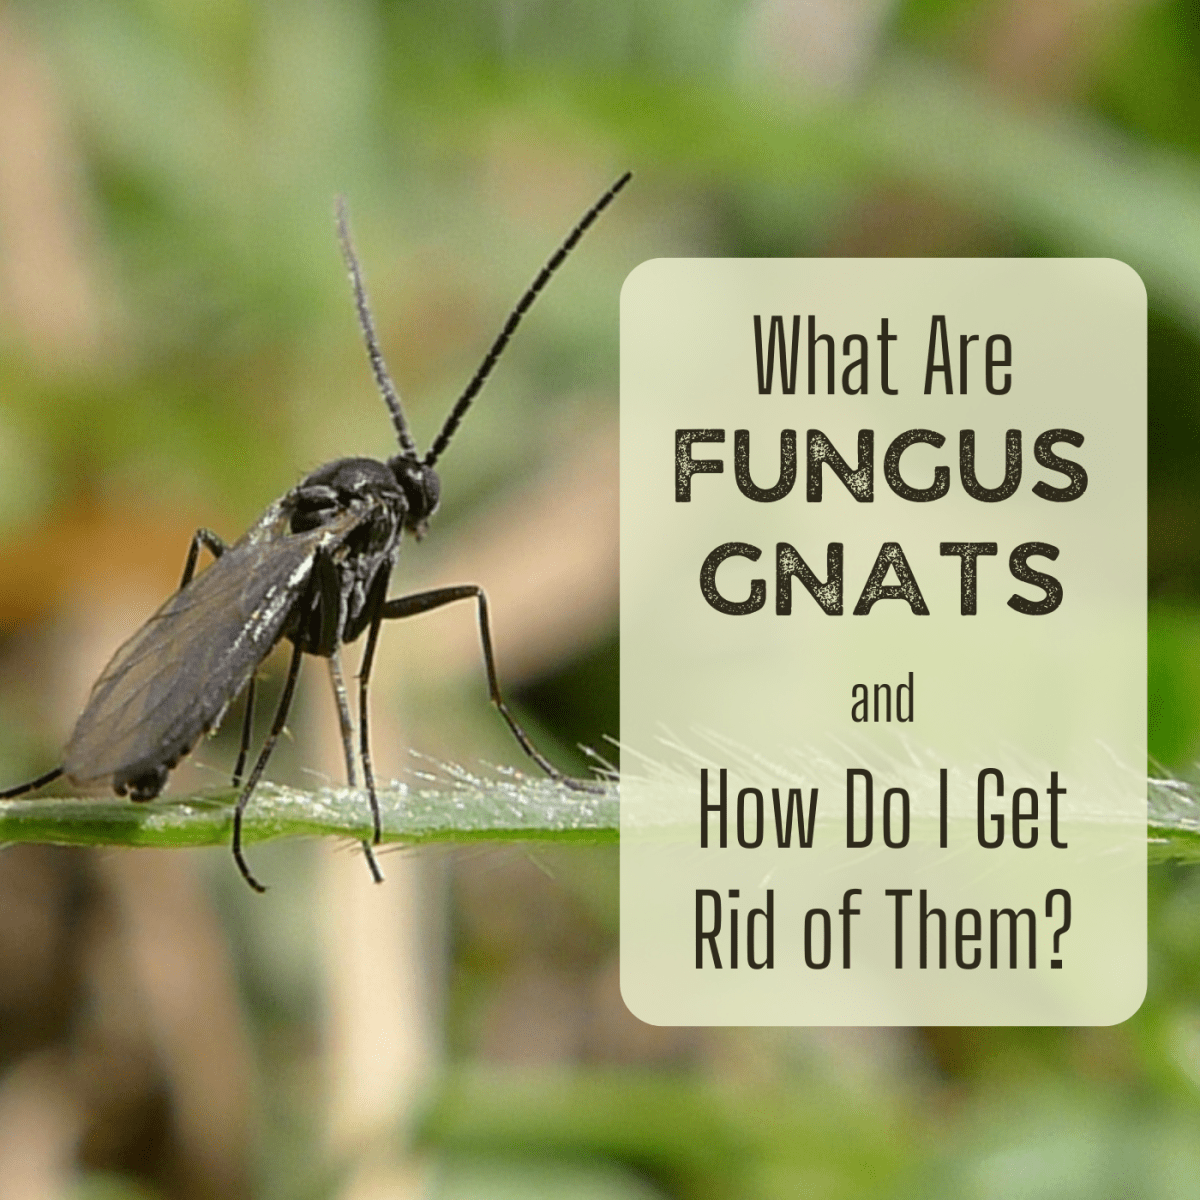 Fungus Gnats Where Do These Little Flying Bugs Come From Dengarden - How To Get Rid Of Small Flying Insects In Bathroom